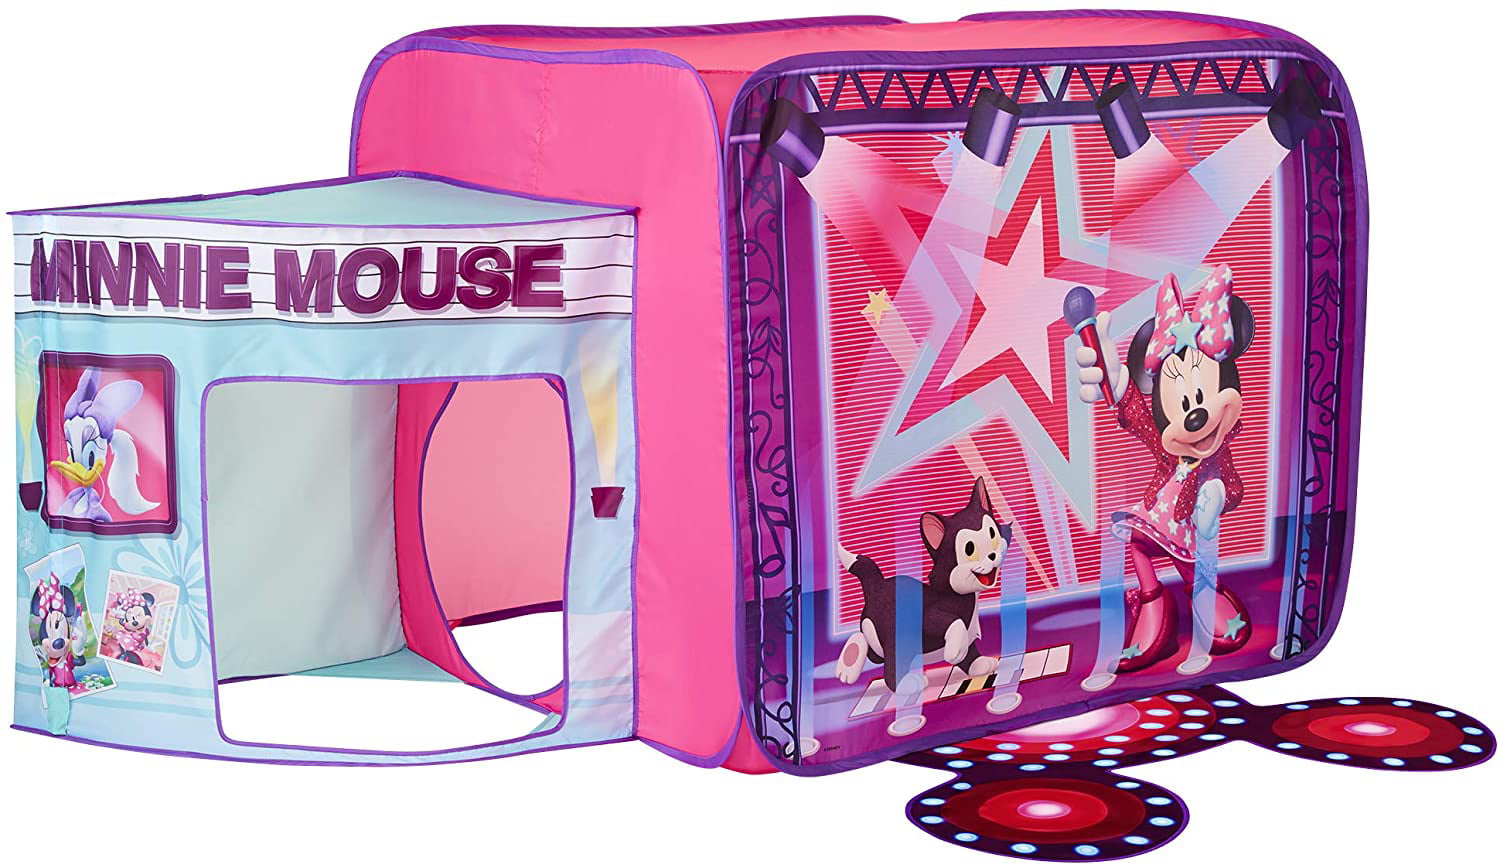 Minnie Mouse Playhouse Kids Indoor Outdoor Patio Windows Doors Toy Tent Doll LG 